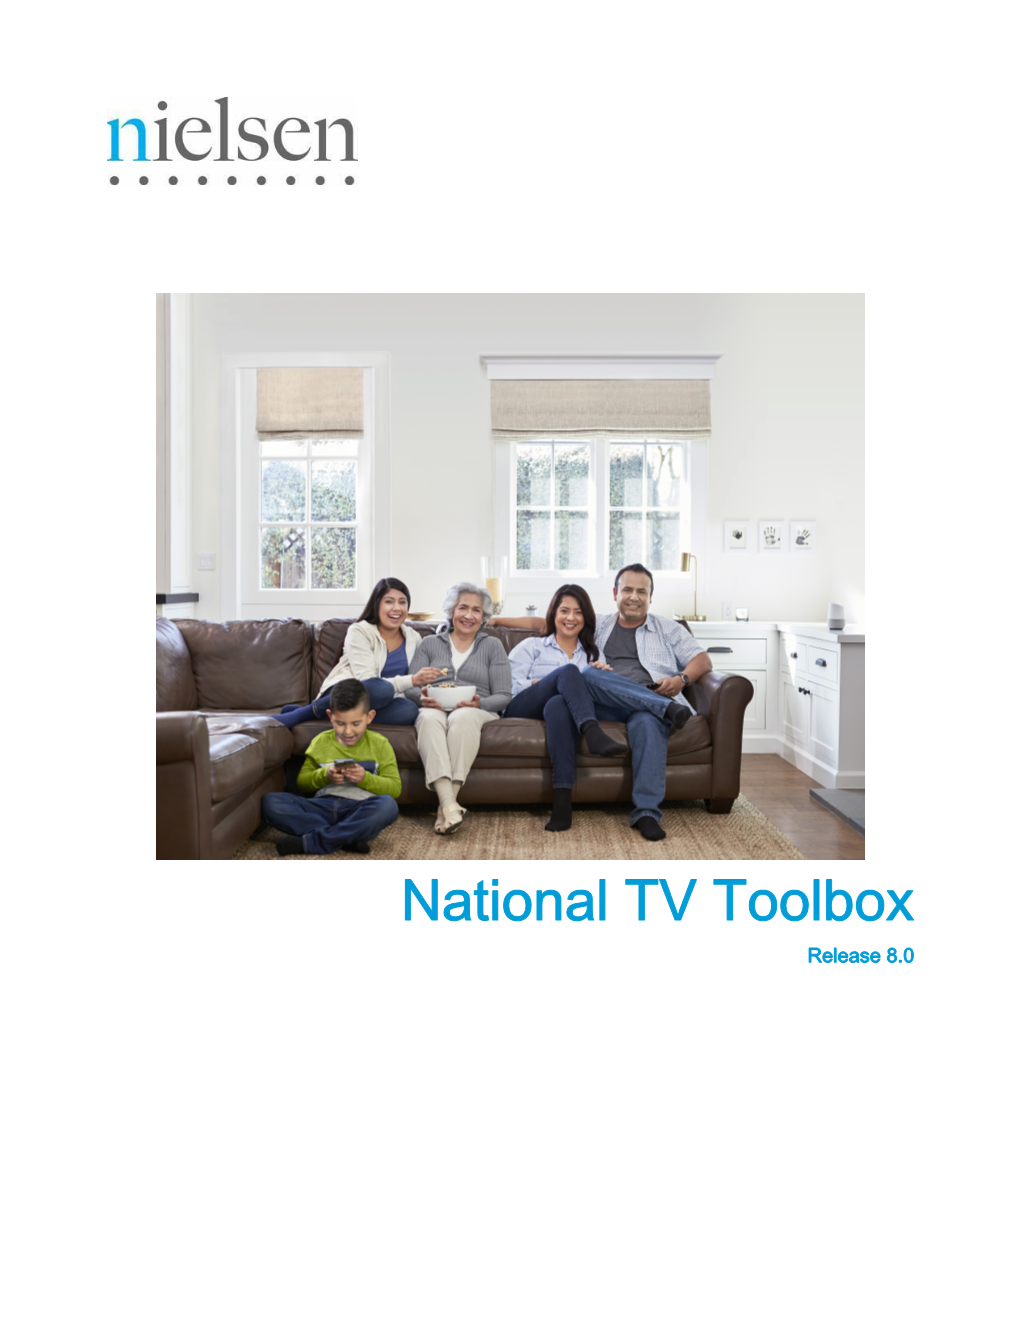 National TV Toolbox Release 8.0 Document: National TV Toolbox Document Version: 8.0 Revised: 01/08/2020